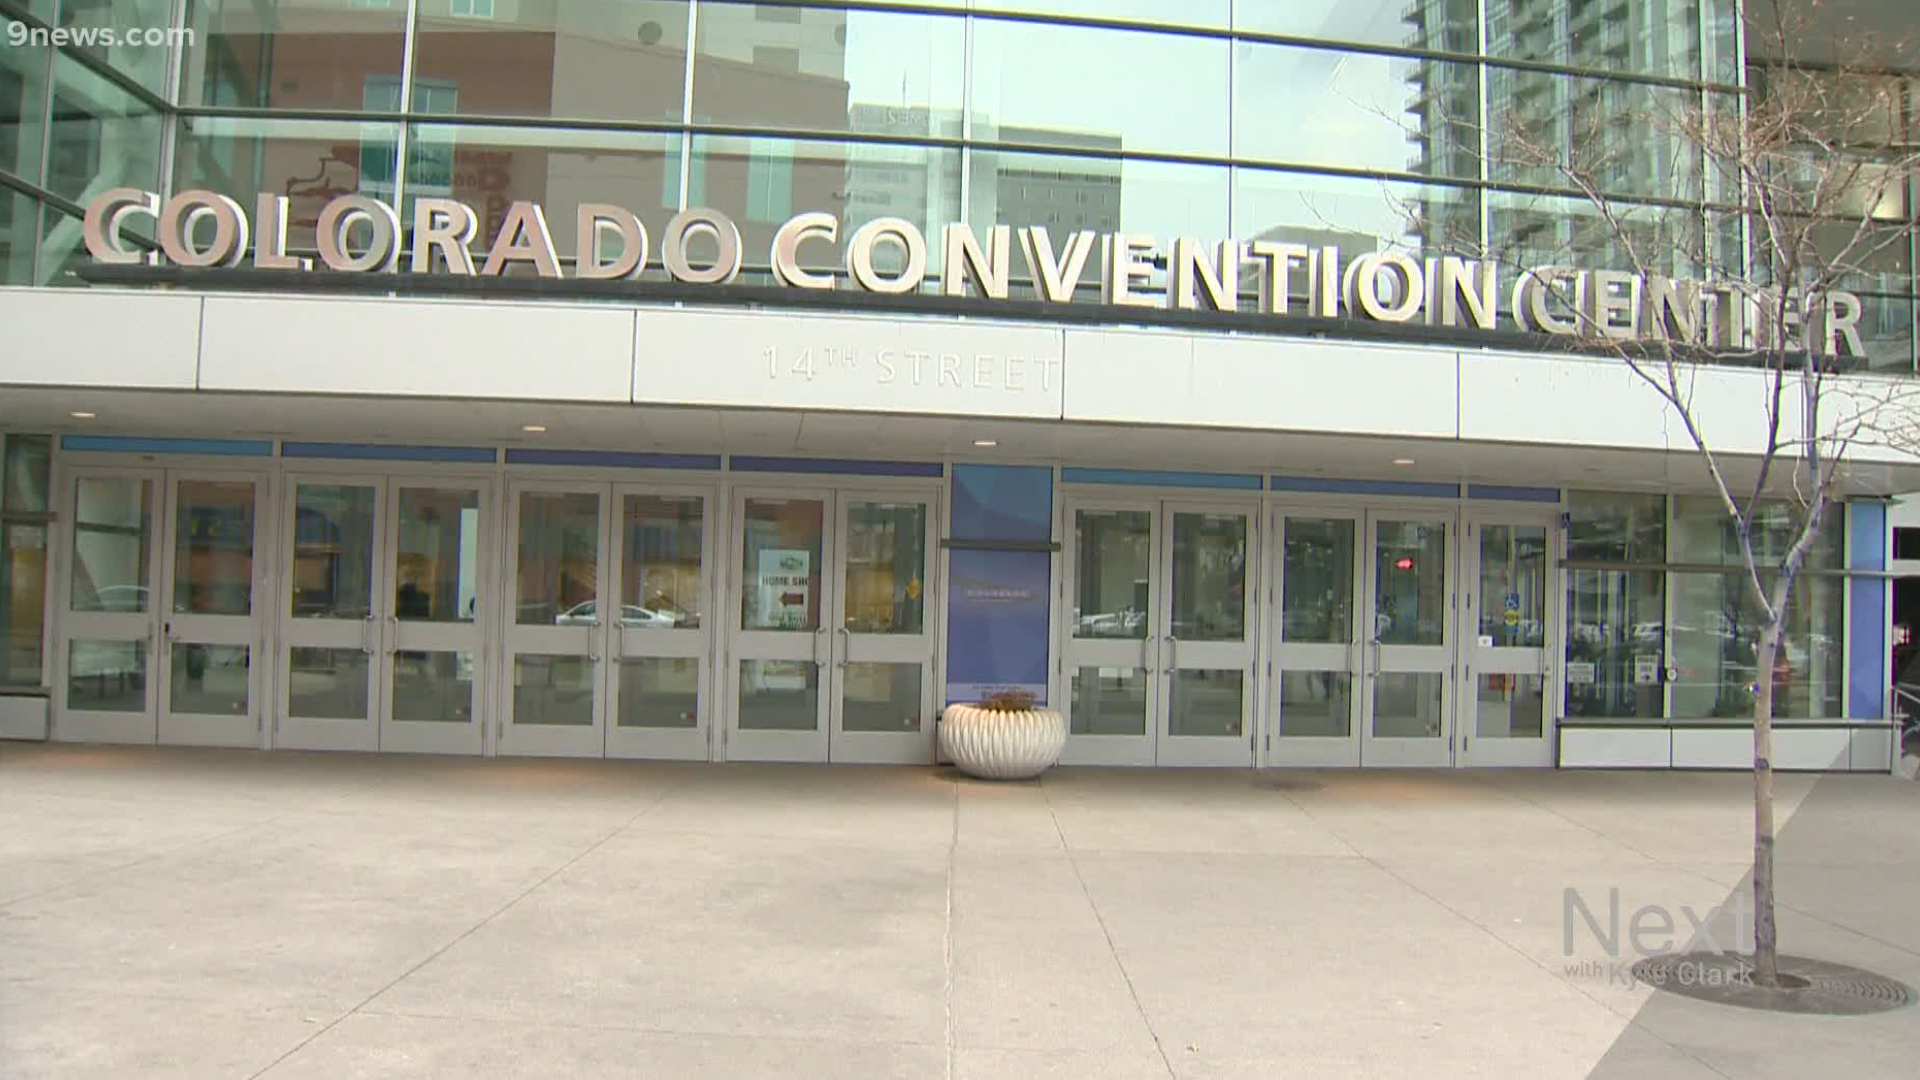 The Colorado Convention Center will be a step-down center, meaning it won't have an ICU.